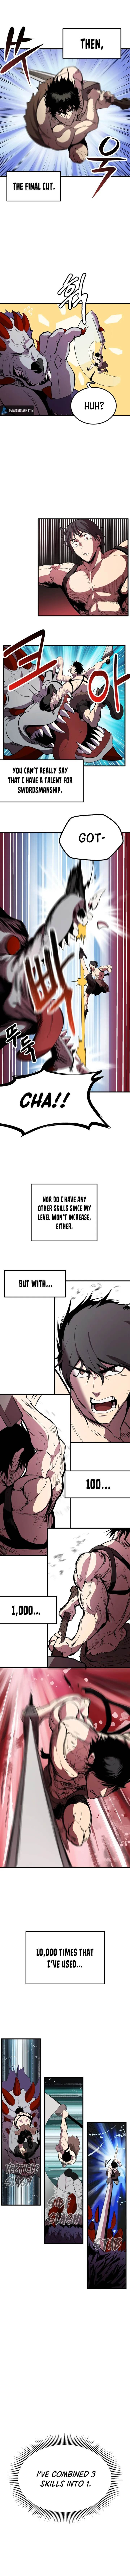 survival-story-of-a-sword-king-in-a-fantasy-world-chap-3-7